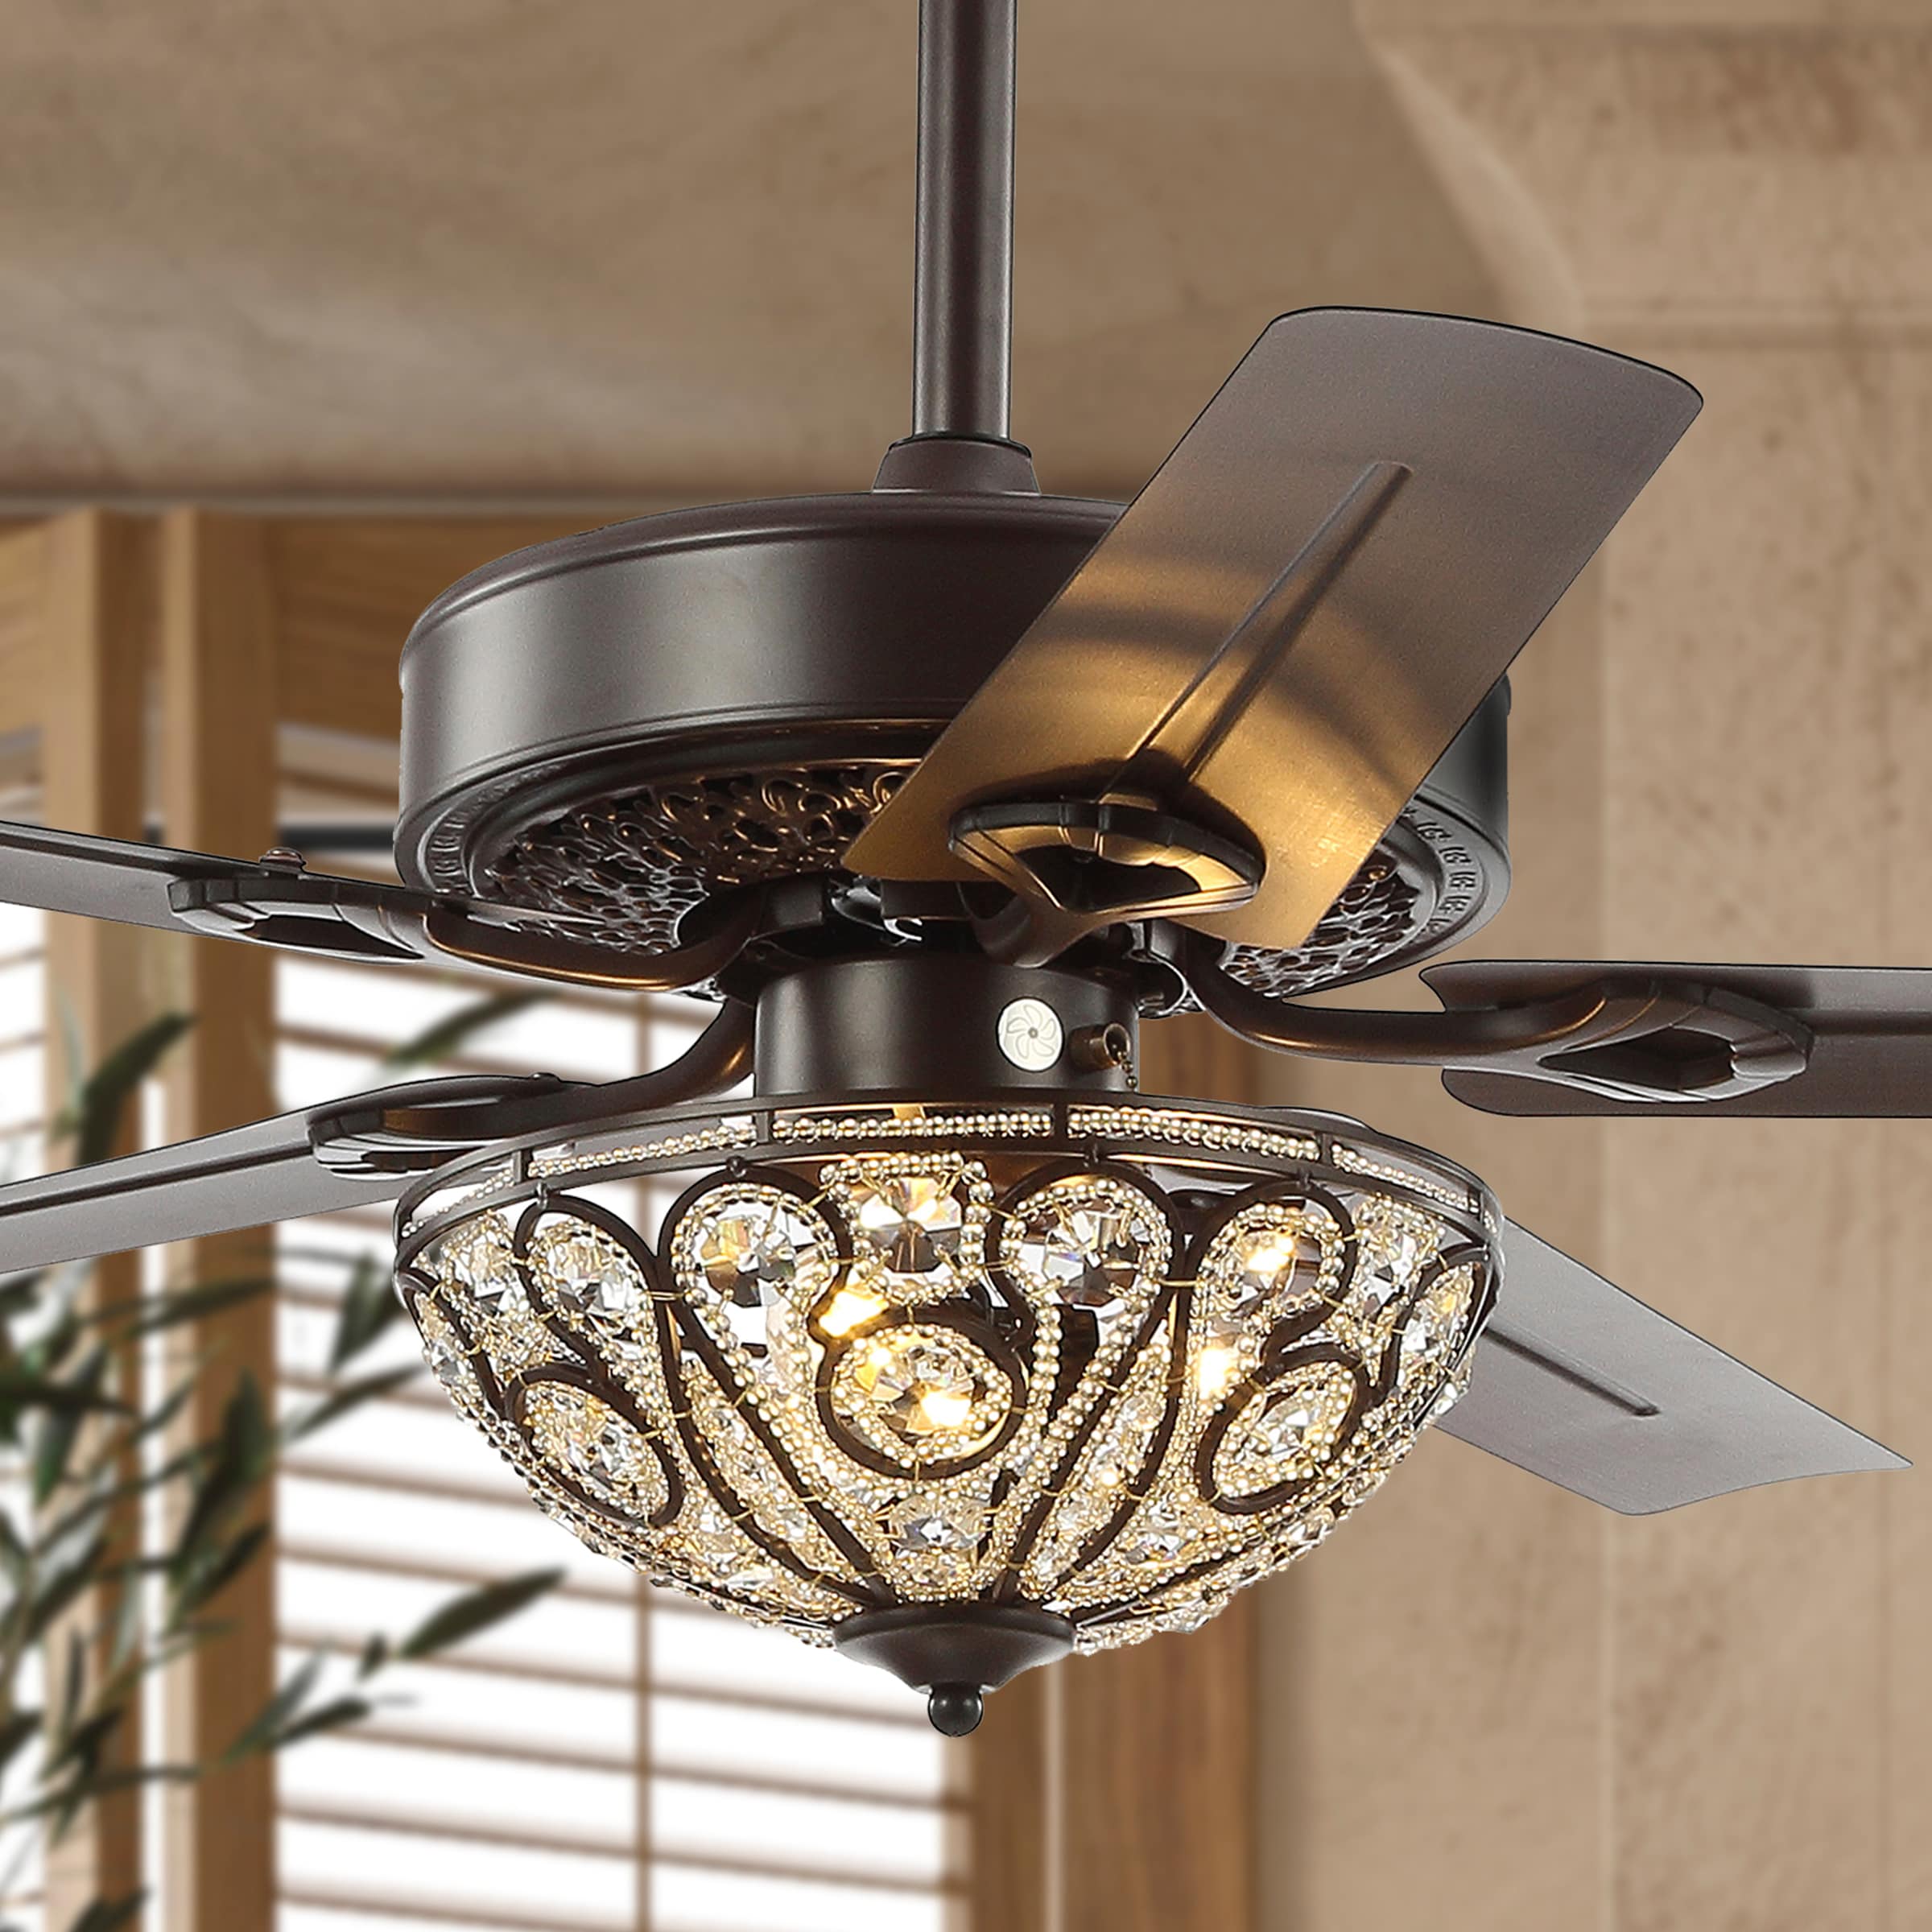 Ceiling Fan With Light And Remote